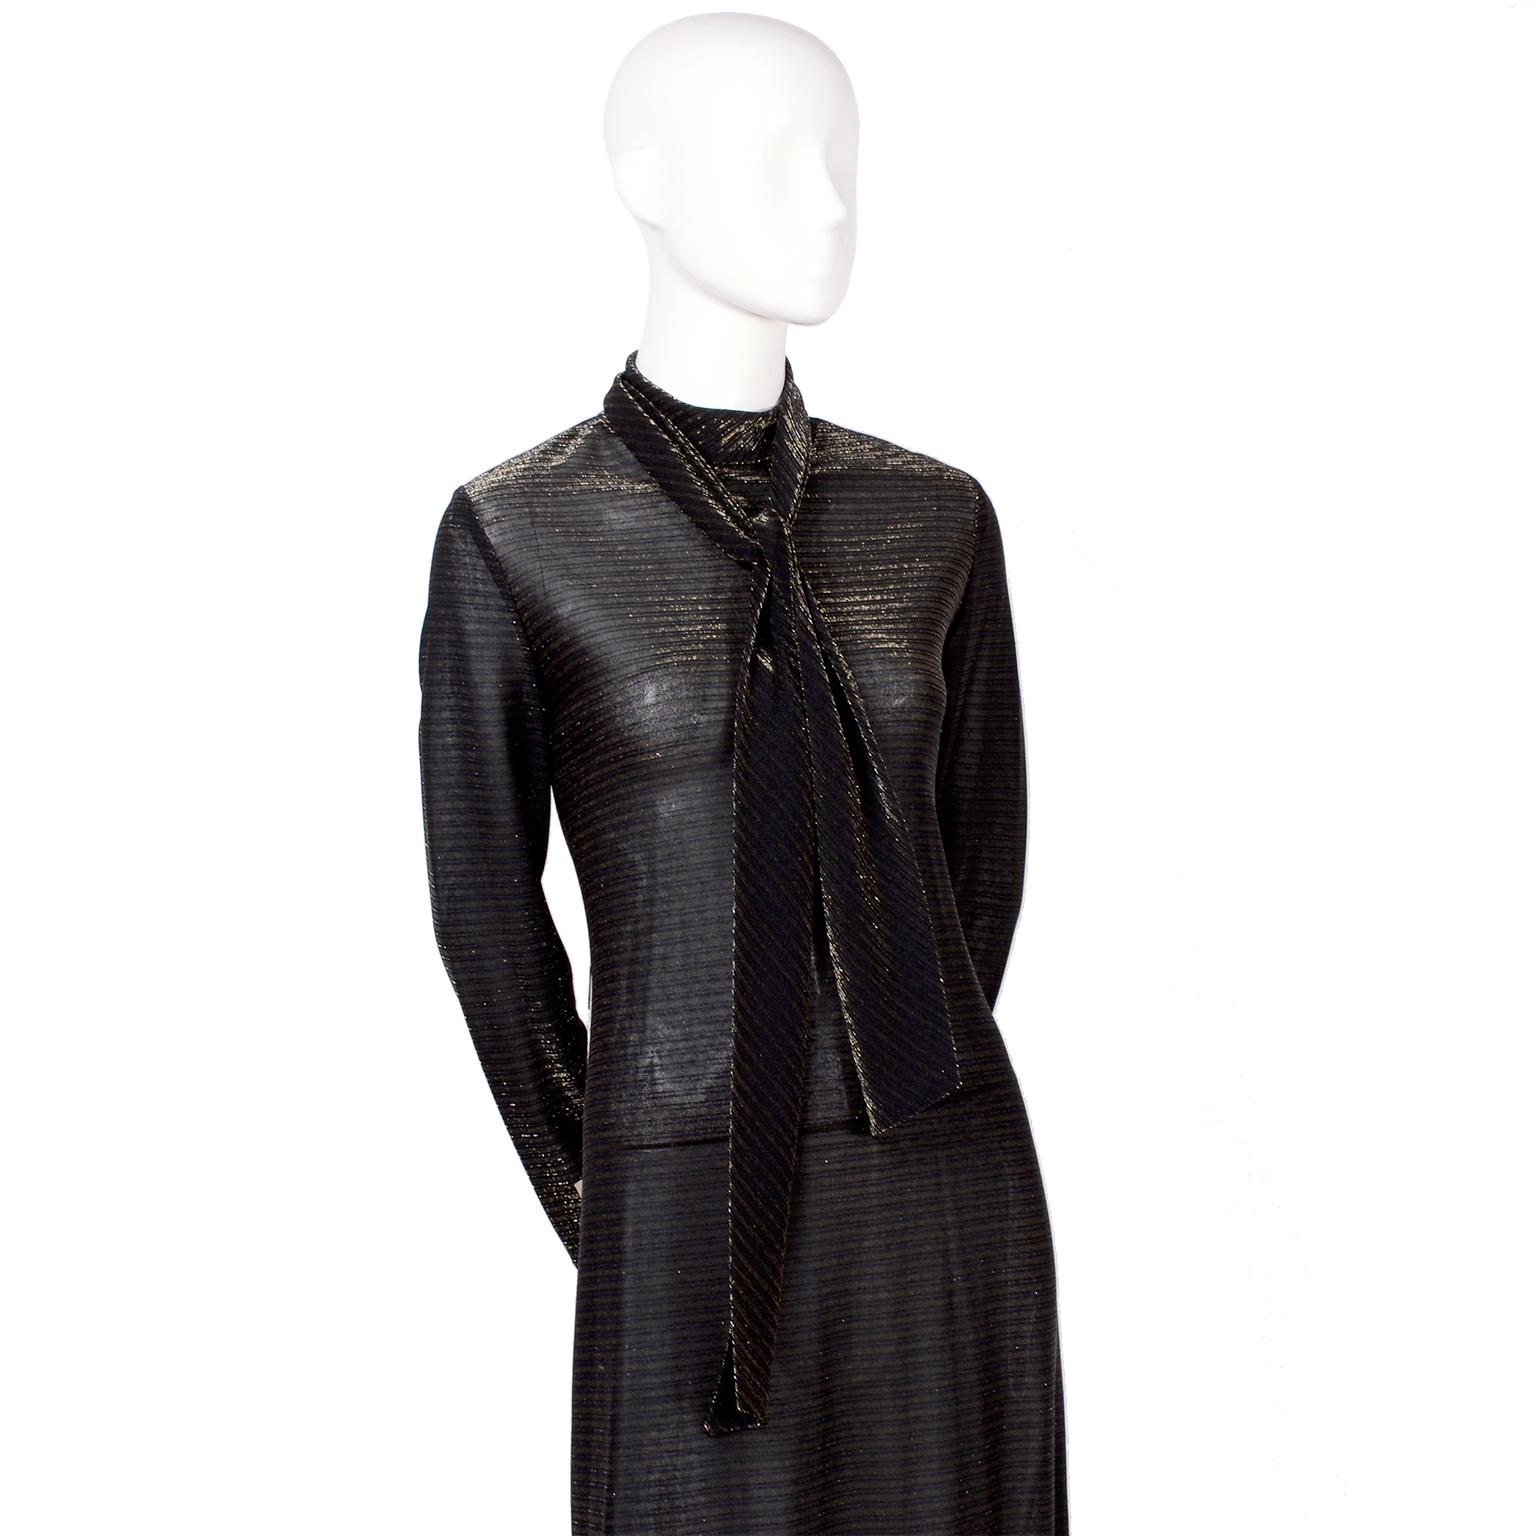 This is a great new but vintage 70's sheer black maxi dress with horizontal thin gold stripes. There is a turtleneck tie at the neck that can tie in back, or loop in the back to tie in front. The dress hooks in the back at the neck. Deadstock with